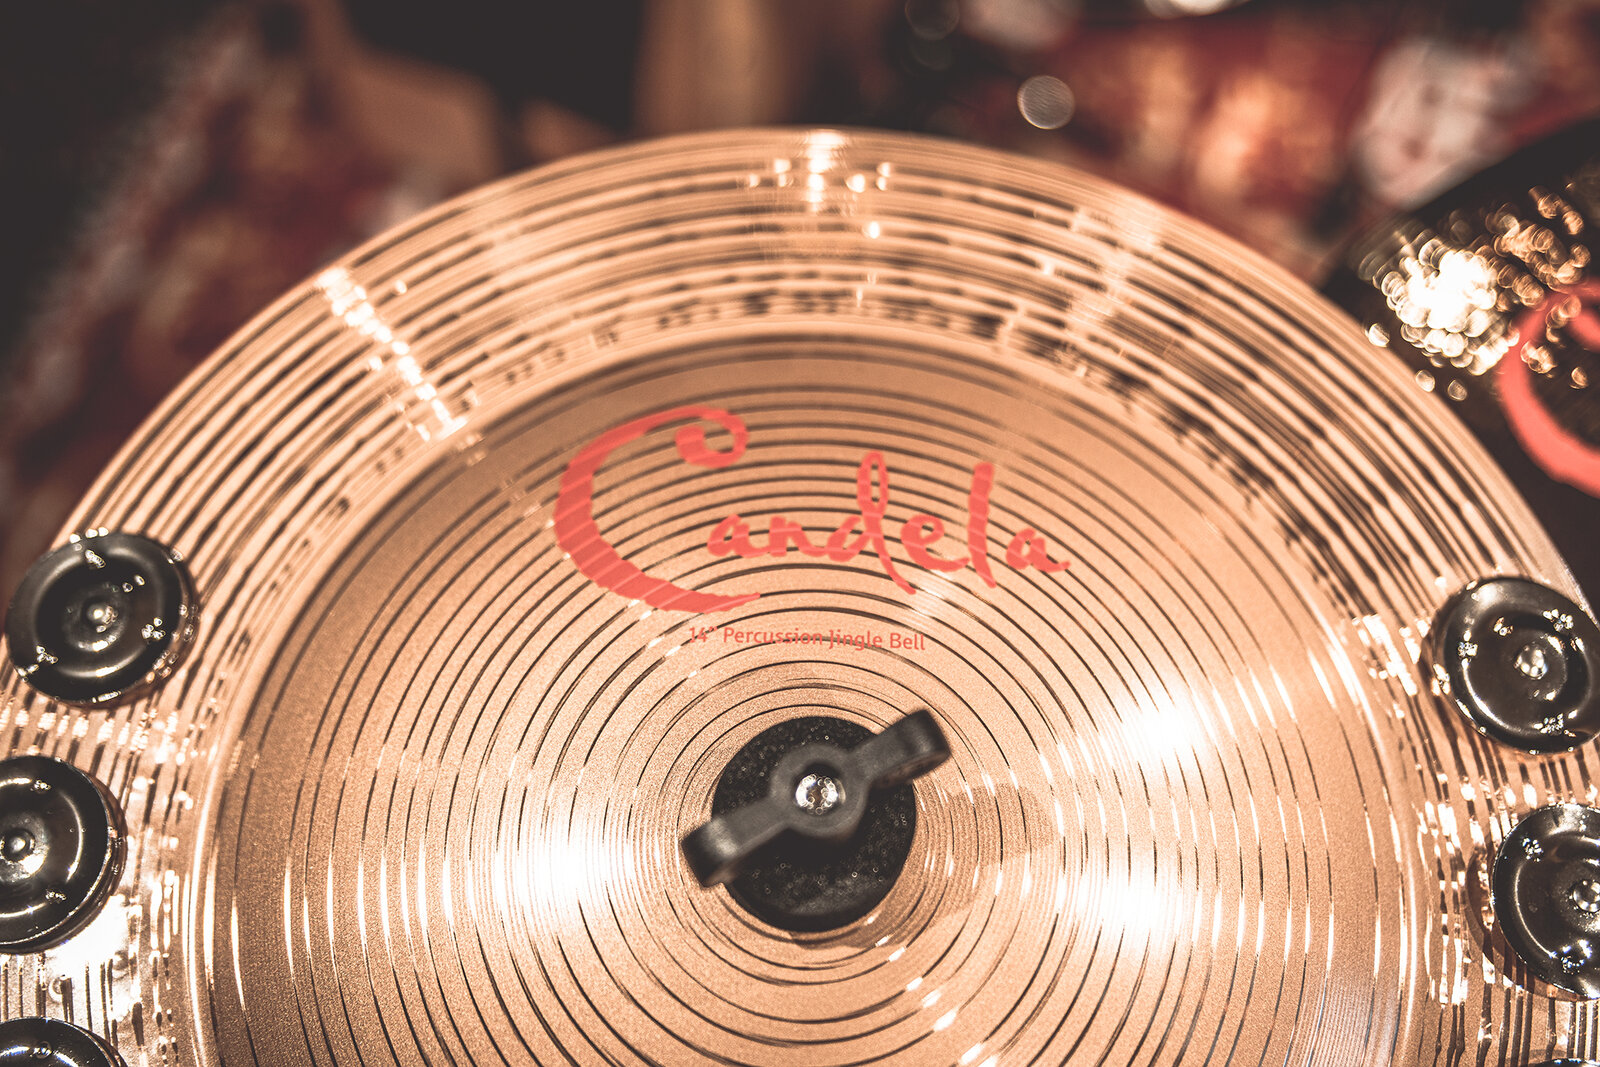 Meinl Percussion - Candela Percussion Cymbals - Blog - Meinl Percussion